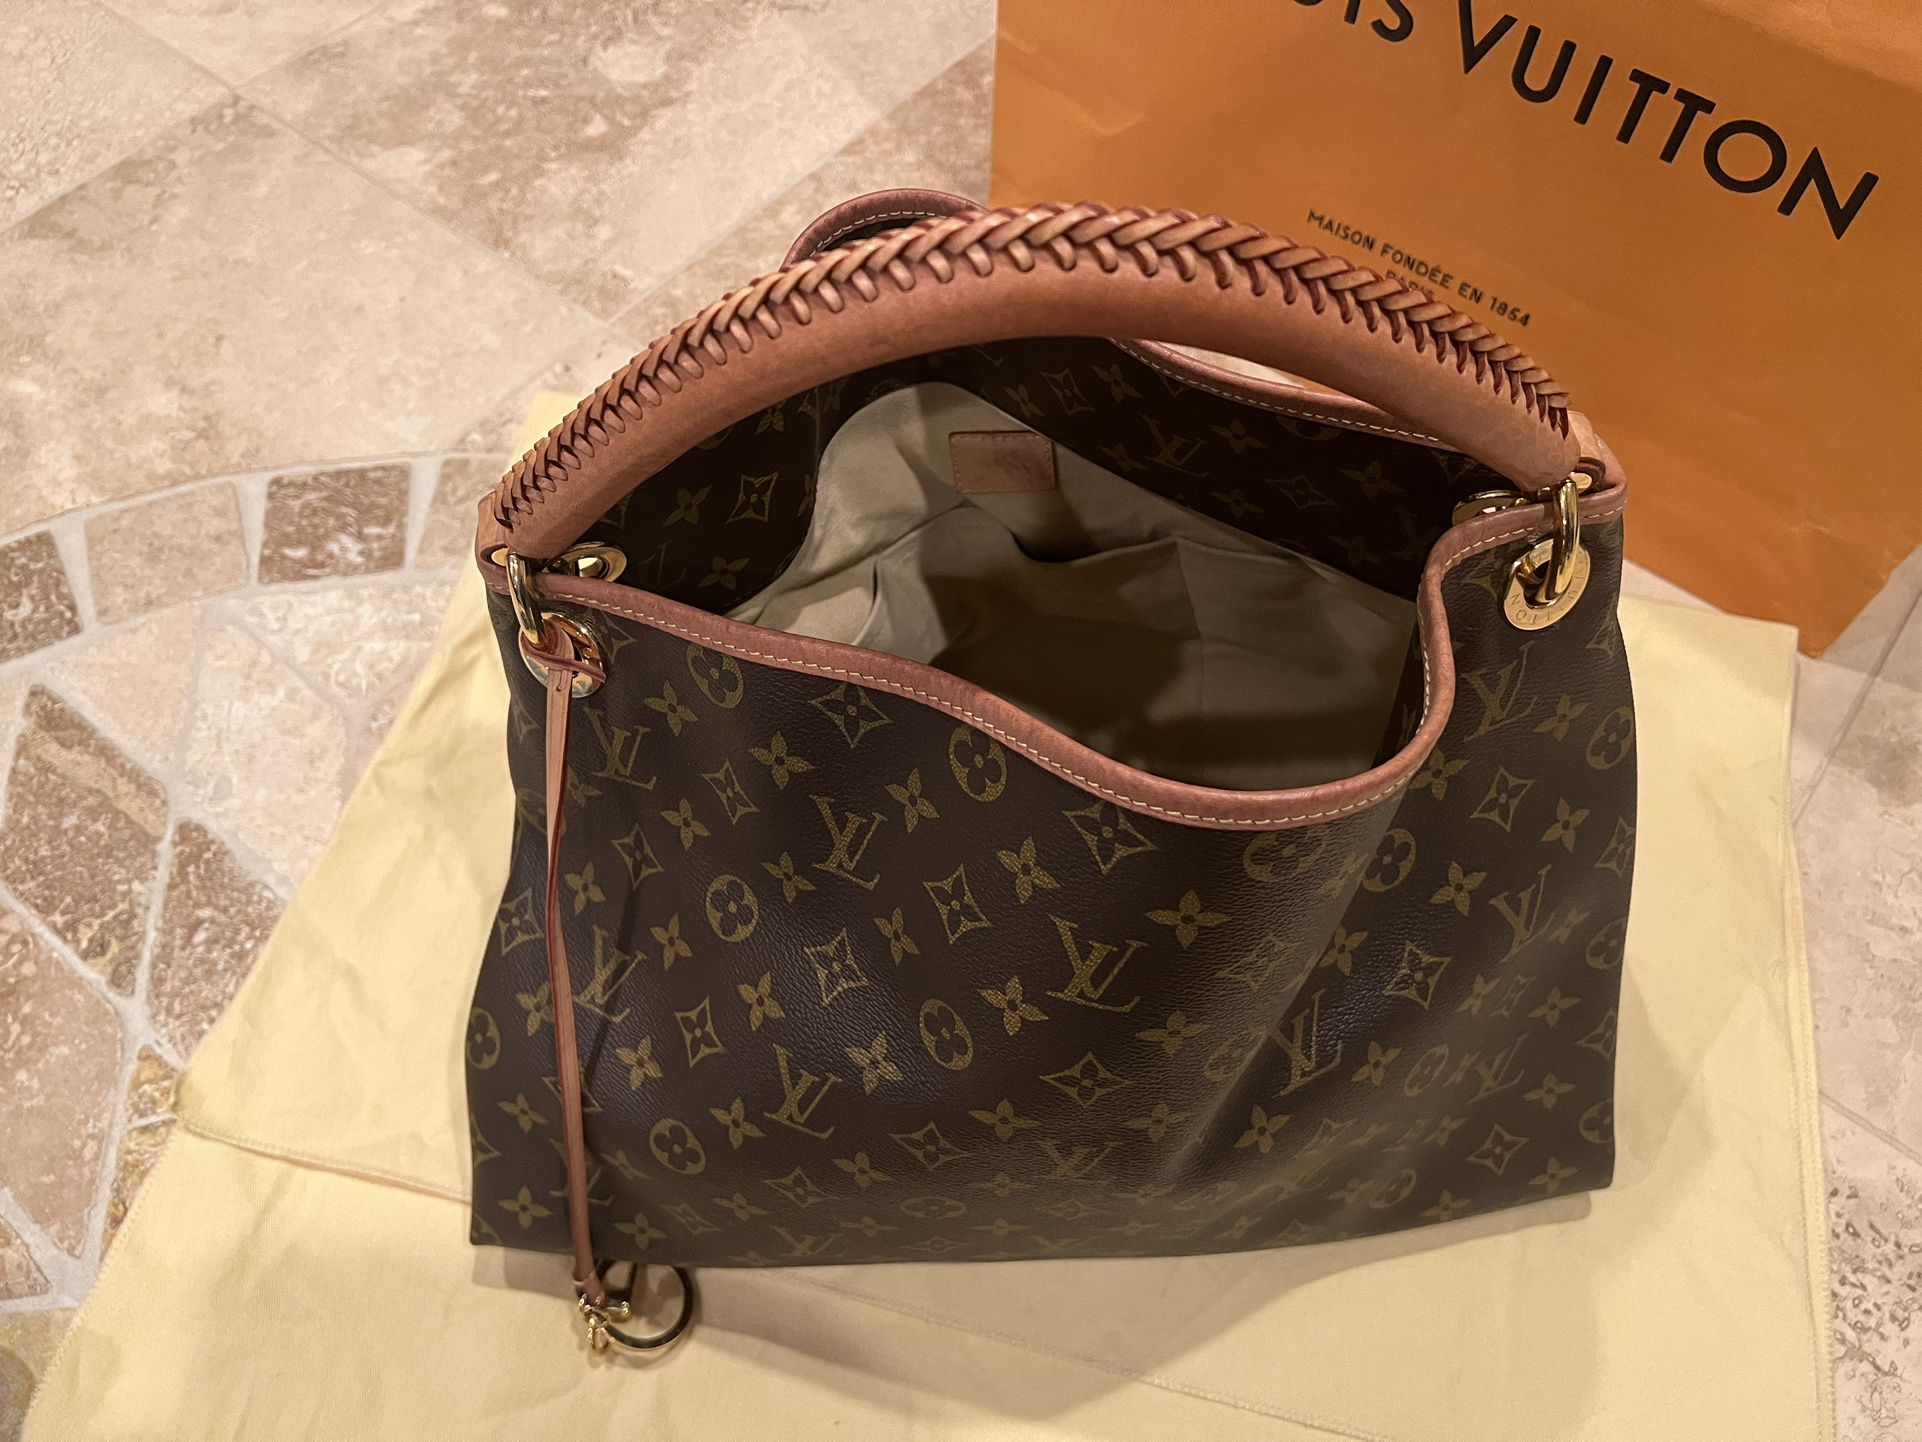 Authentic Louis Vuitton Artsy MM for Sale in Chula Vista, CA - OfferUp